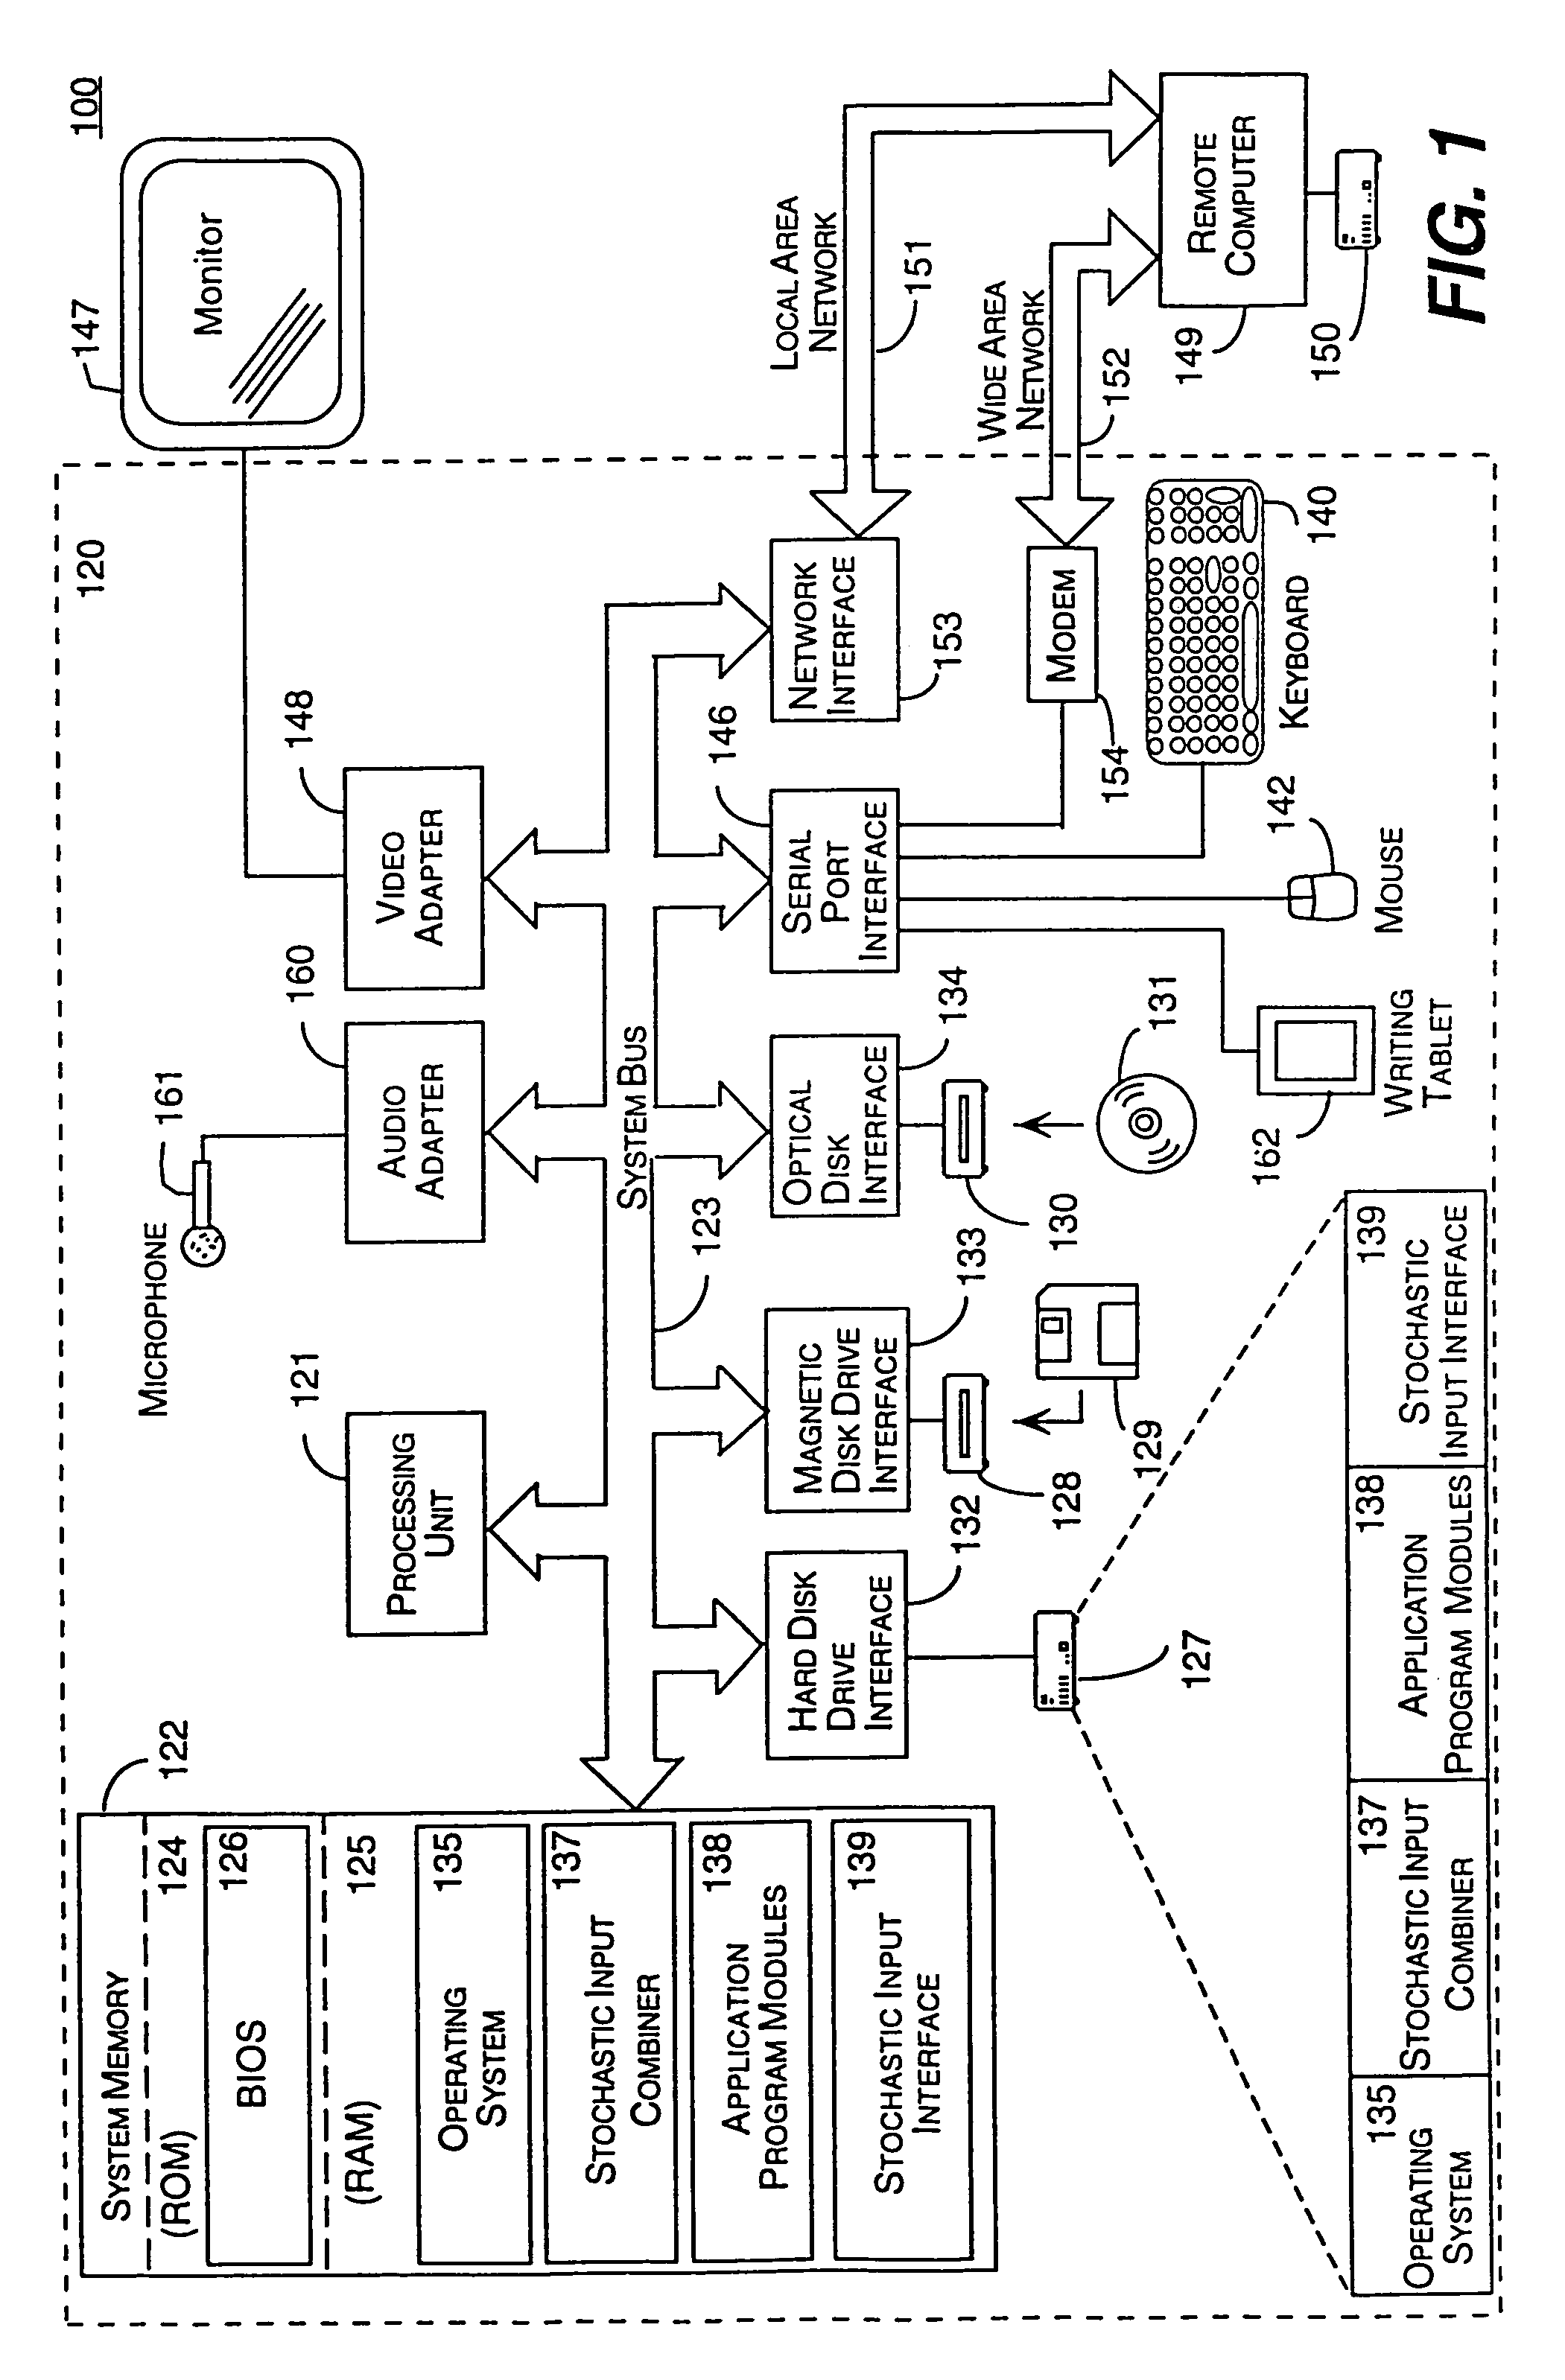 Method and system for filtering and selecting from a candidate list generated by a stochastic input method